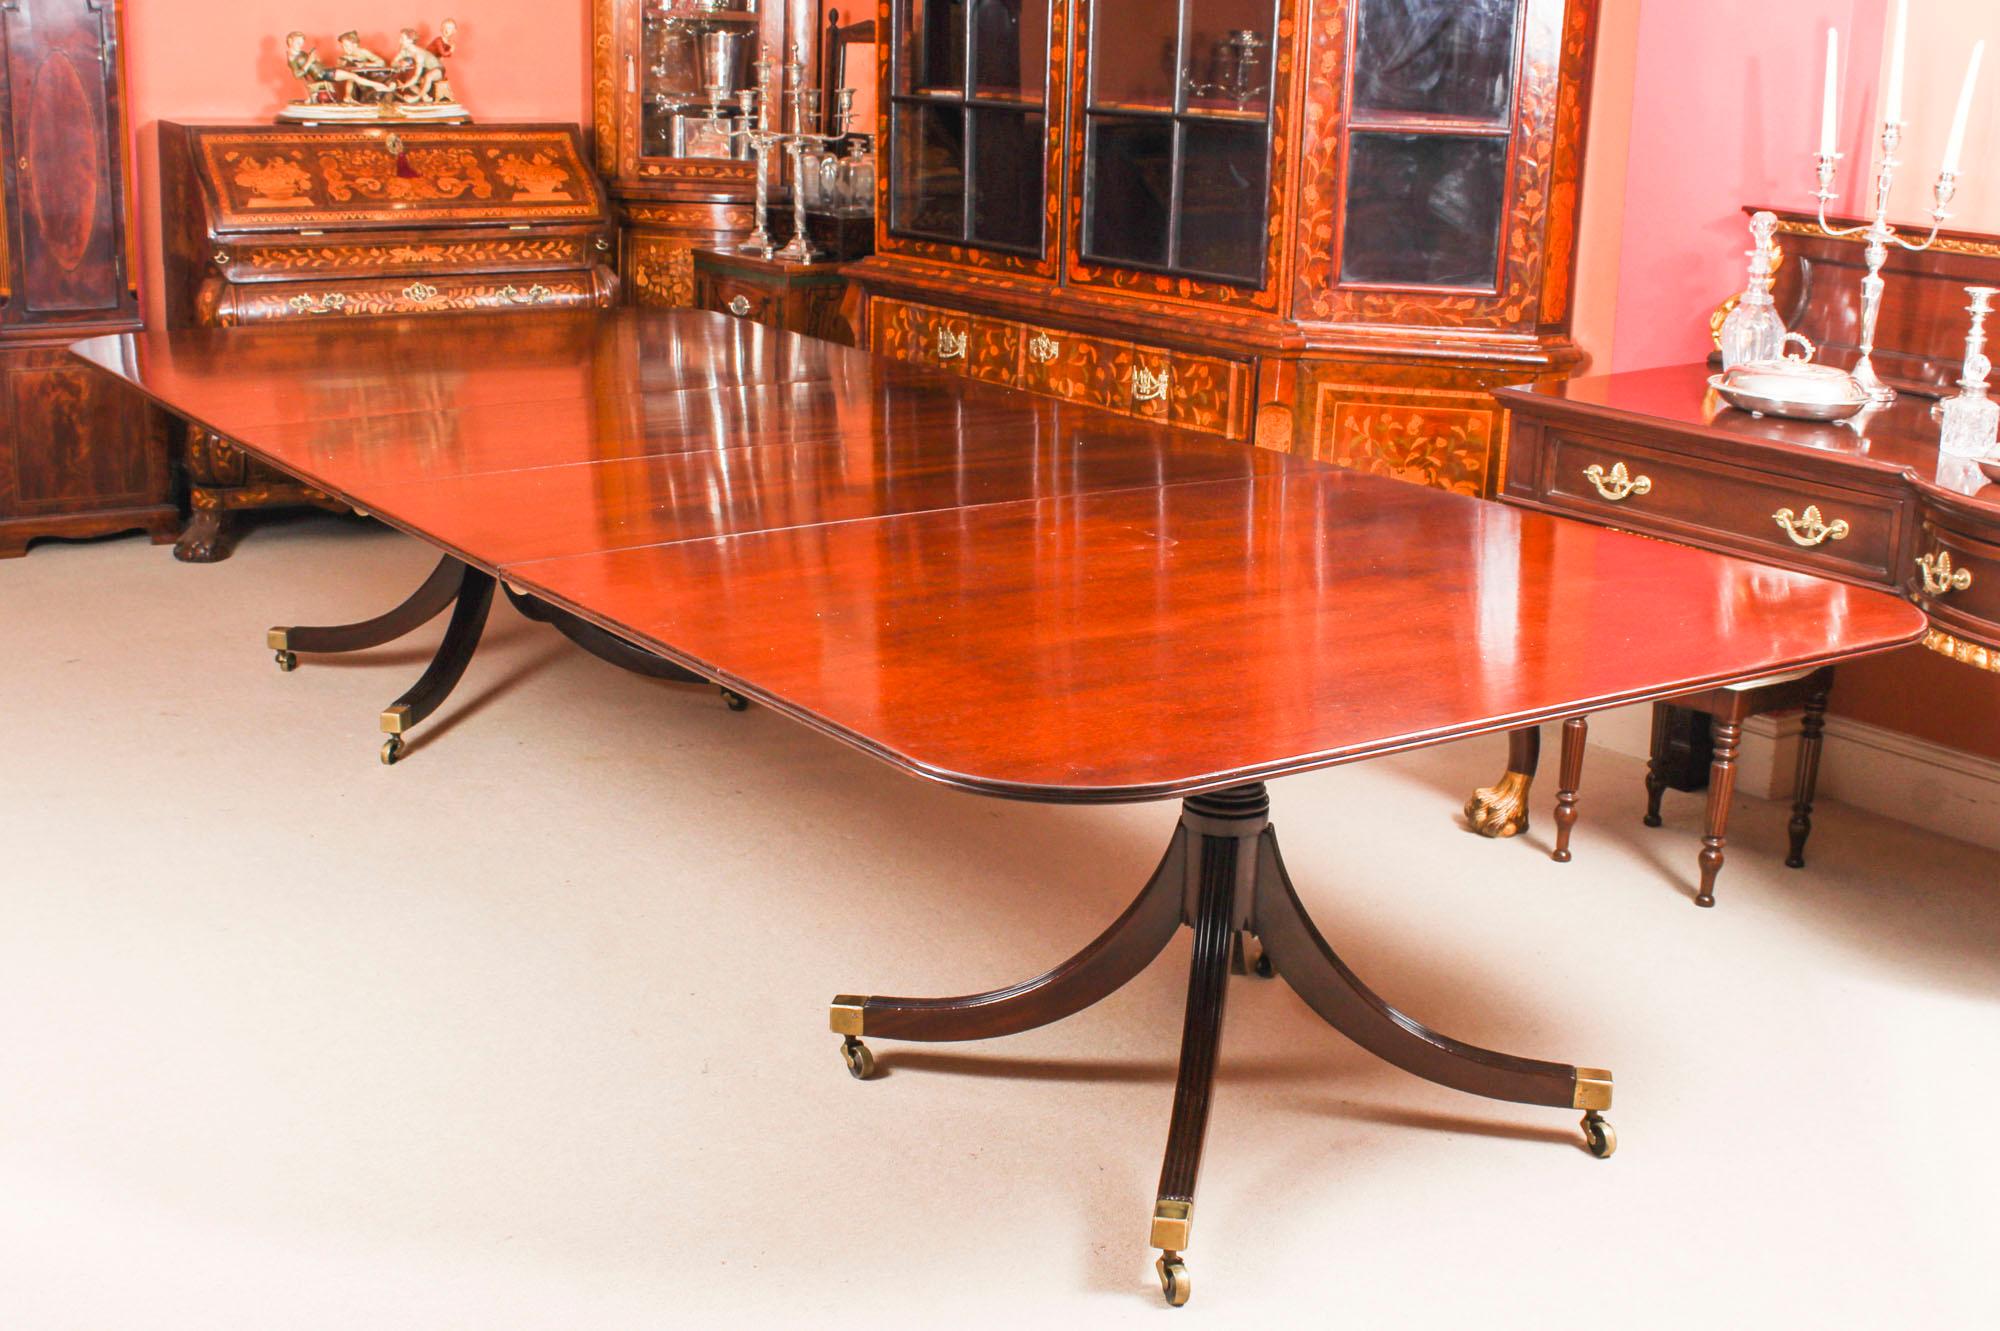 This is an elegant dining set comprising a vintage George III Regency style dining table, mid-20th century in date, with a fabulous set of fourteen antique Victorian dining chairs circa 1870 in date.

The table has two additional leaves which can